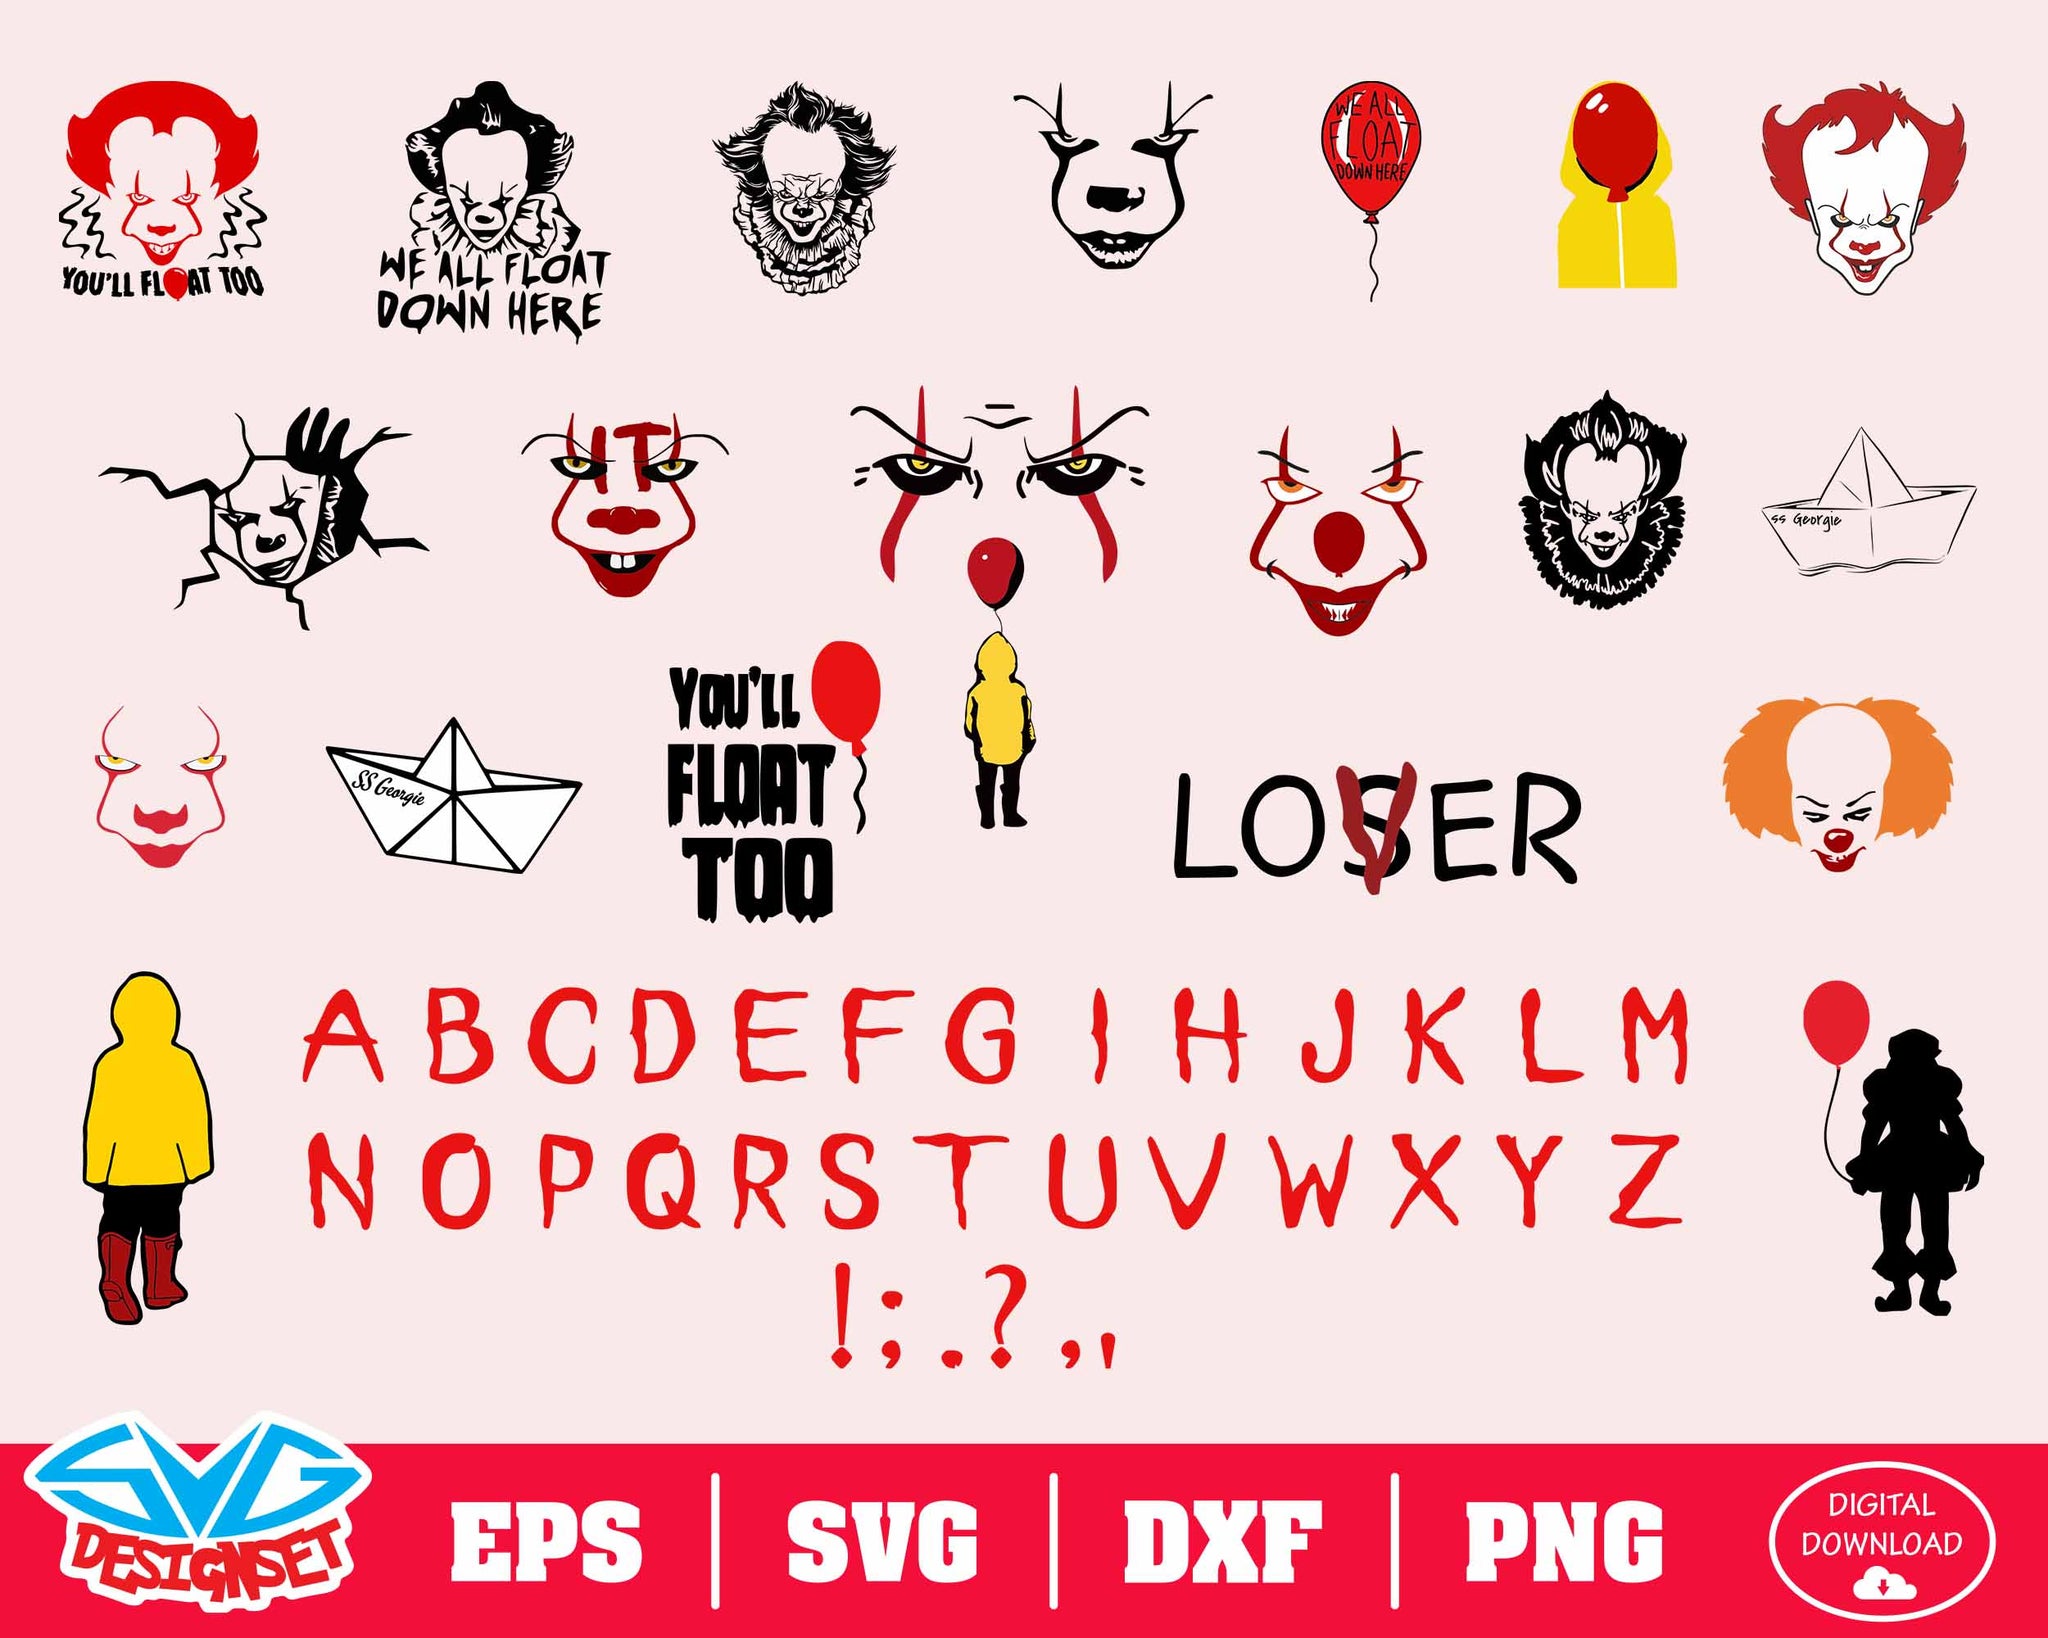 Pennywise Svg, Dxf, Eps, Png, Clipart, Silhouette and Cutfiles #1 - SVGDesignSets